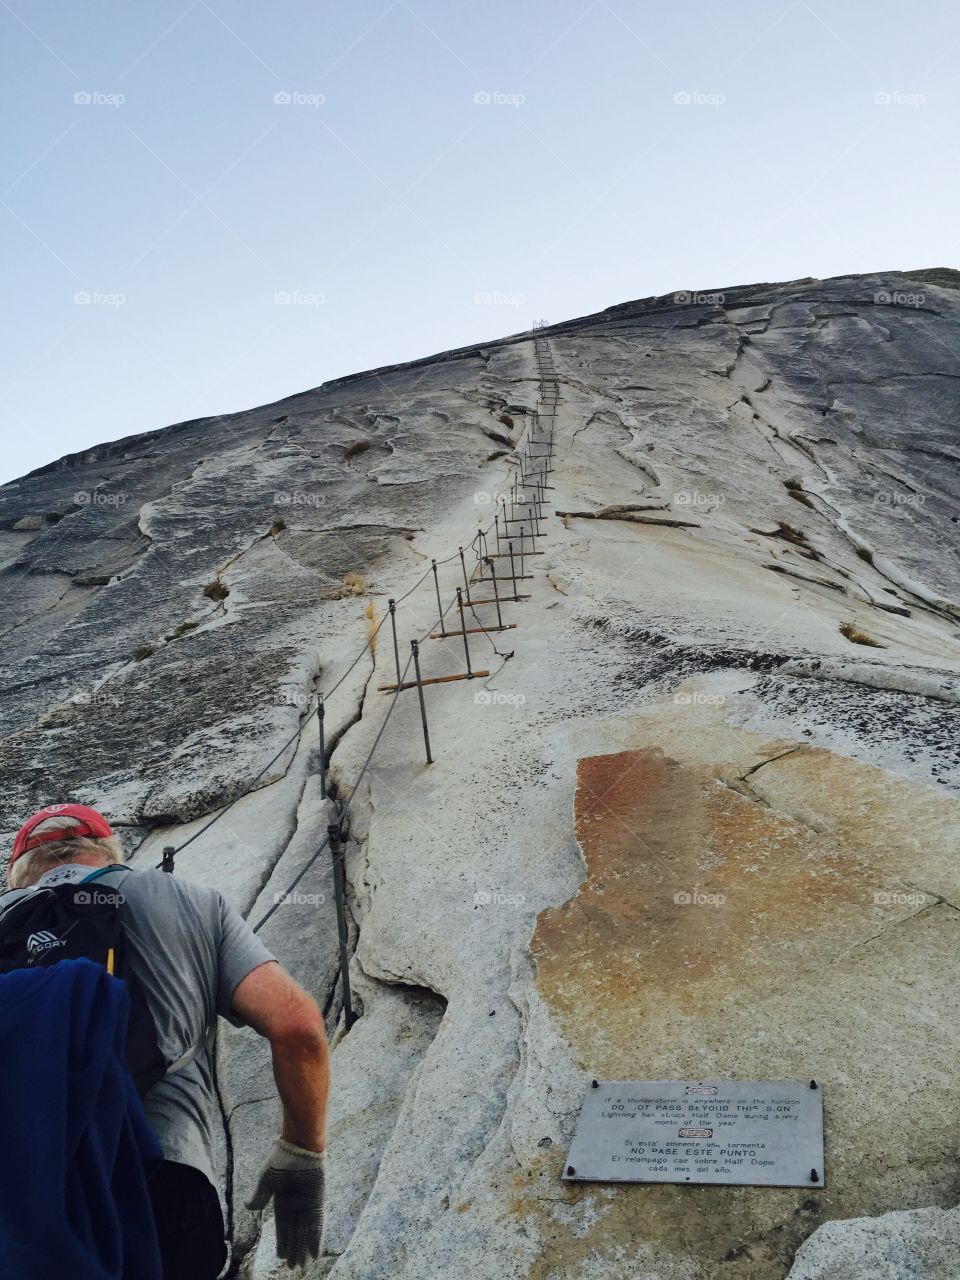 The climb to half dome in Yosemite. It looks scary but after a 9 mile hike you gotta do it